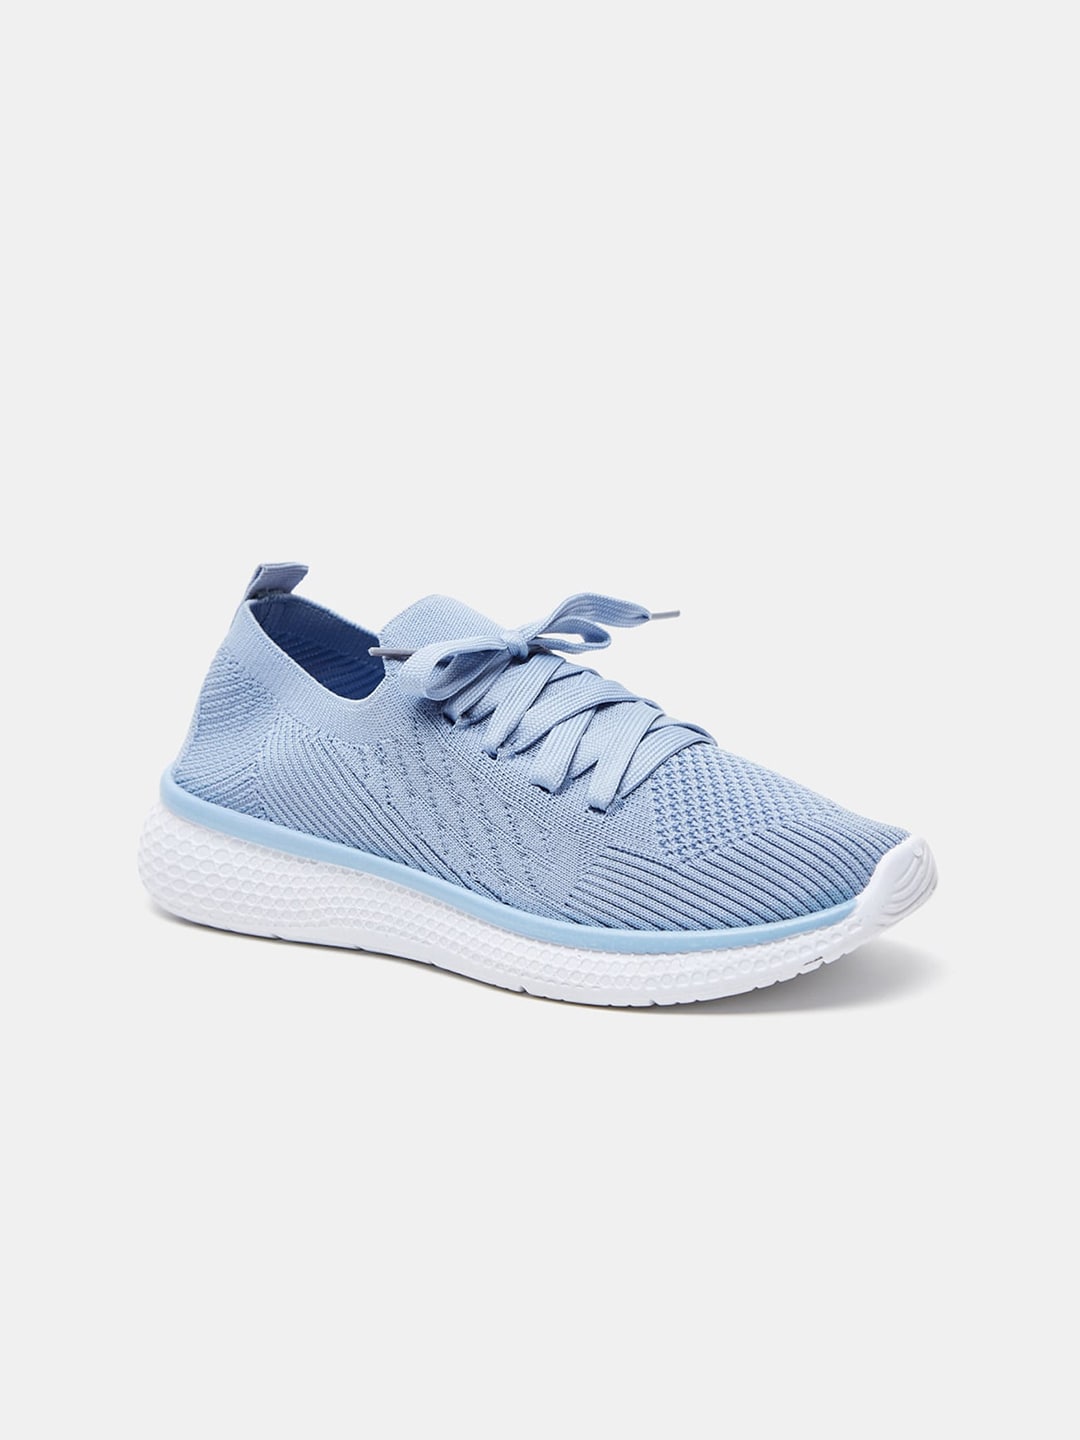 shoexpress Women Blue Textile Running Non-Marking Shoes Price in India